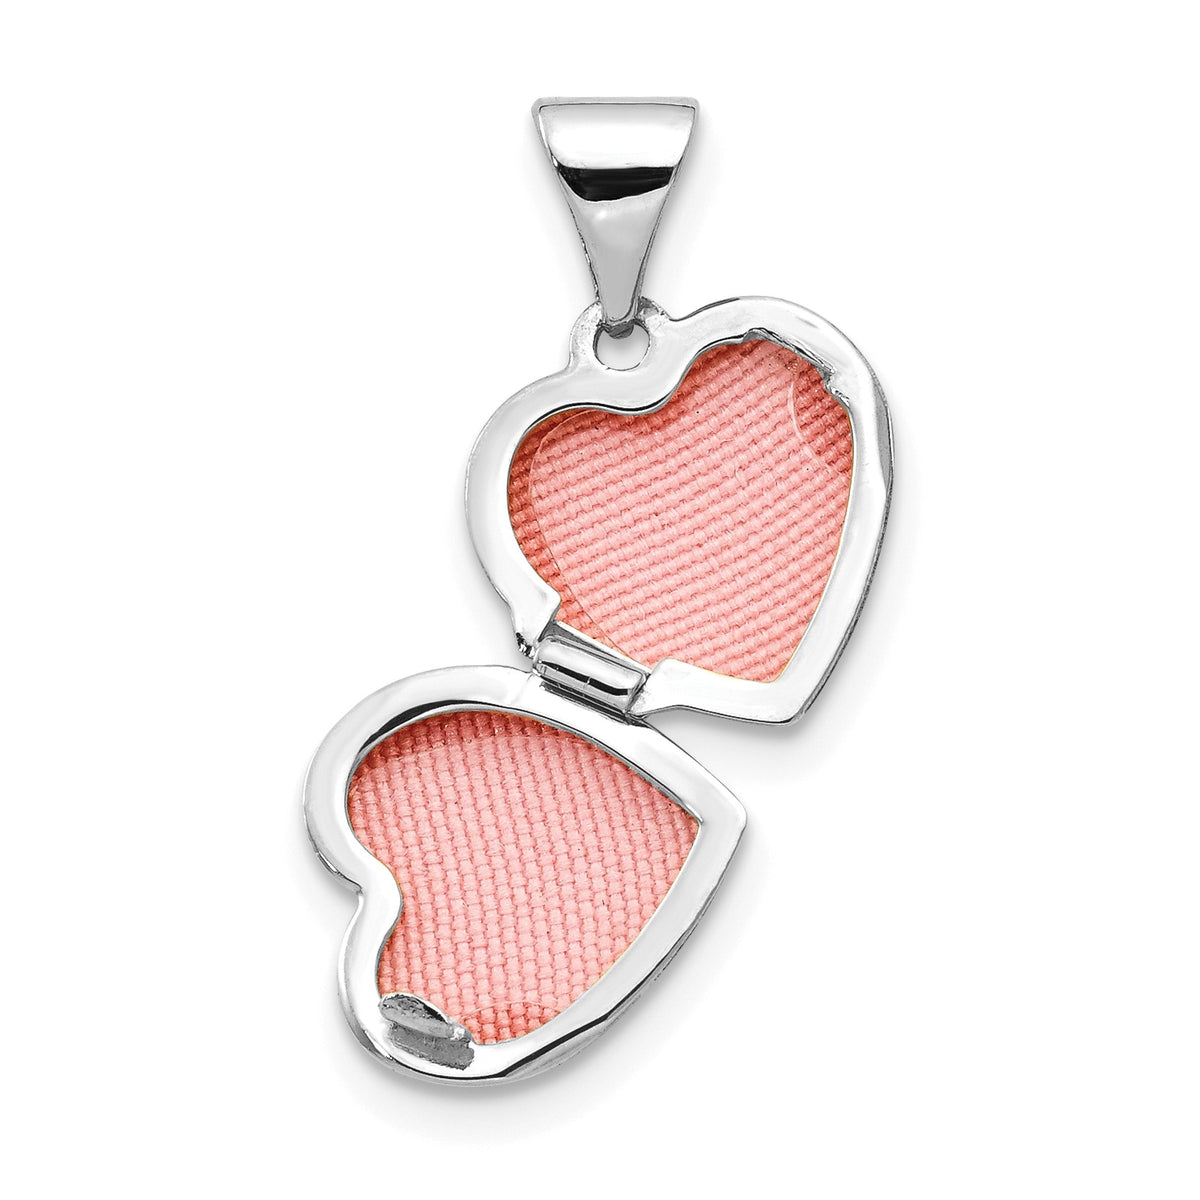 Alternate view of the 14k White Gold 10mm Polished Heart Shaped Locket by The Black Bow Jewelry Co.